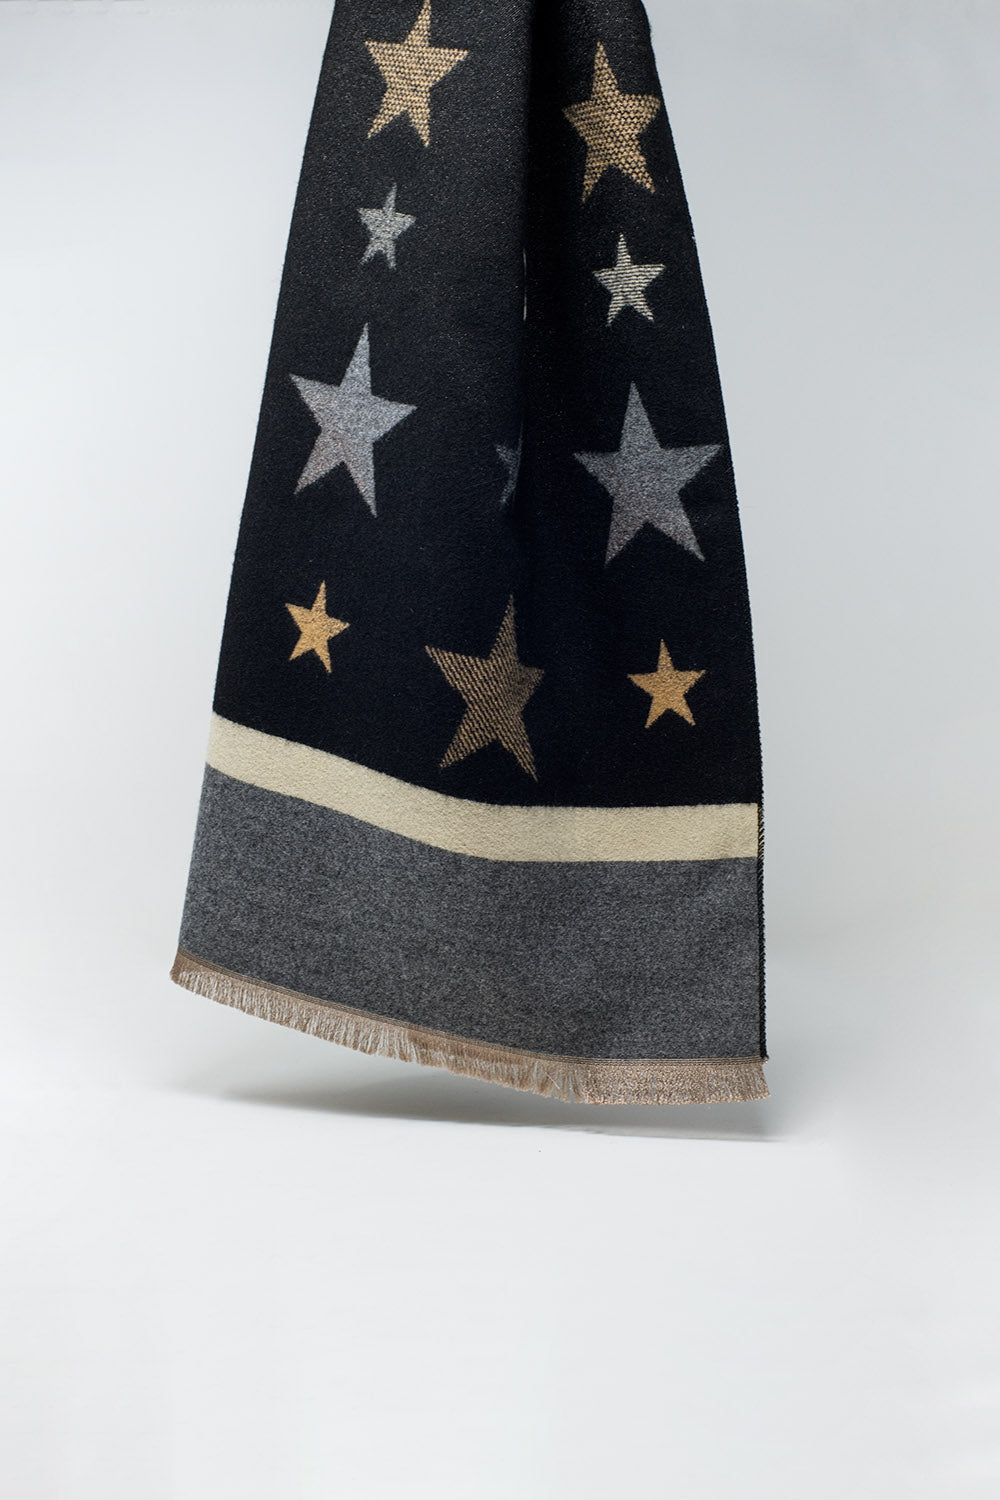 Black Lightweight Scarf with Stripes and Stars in Grey and Brown